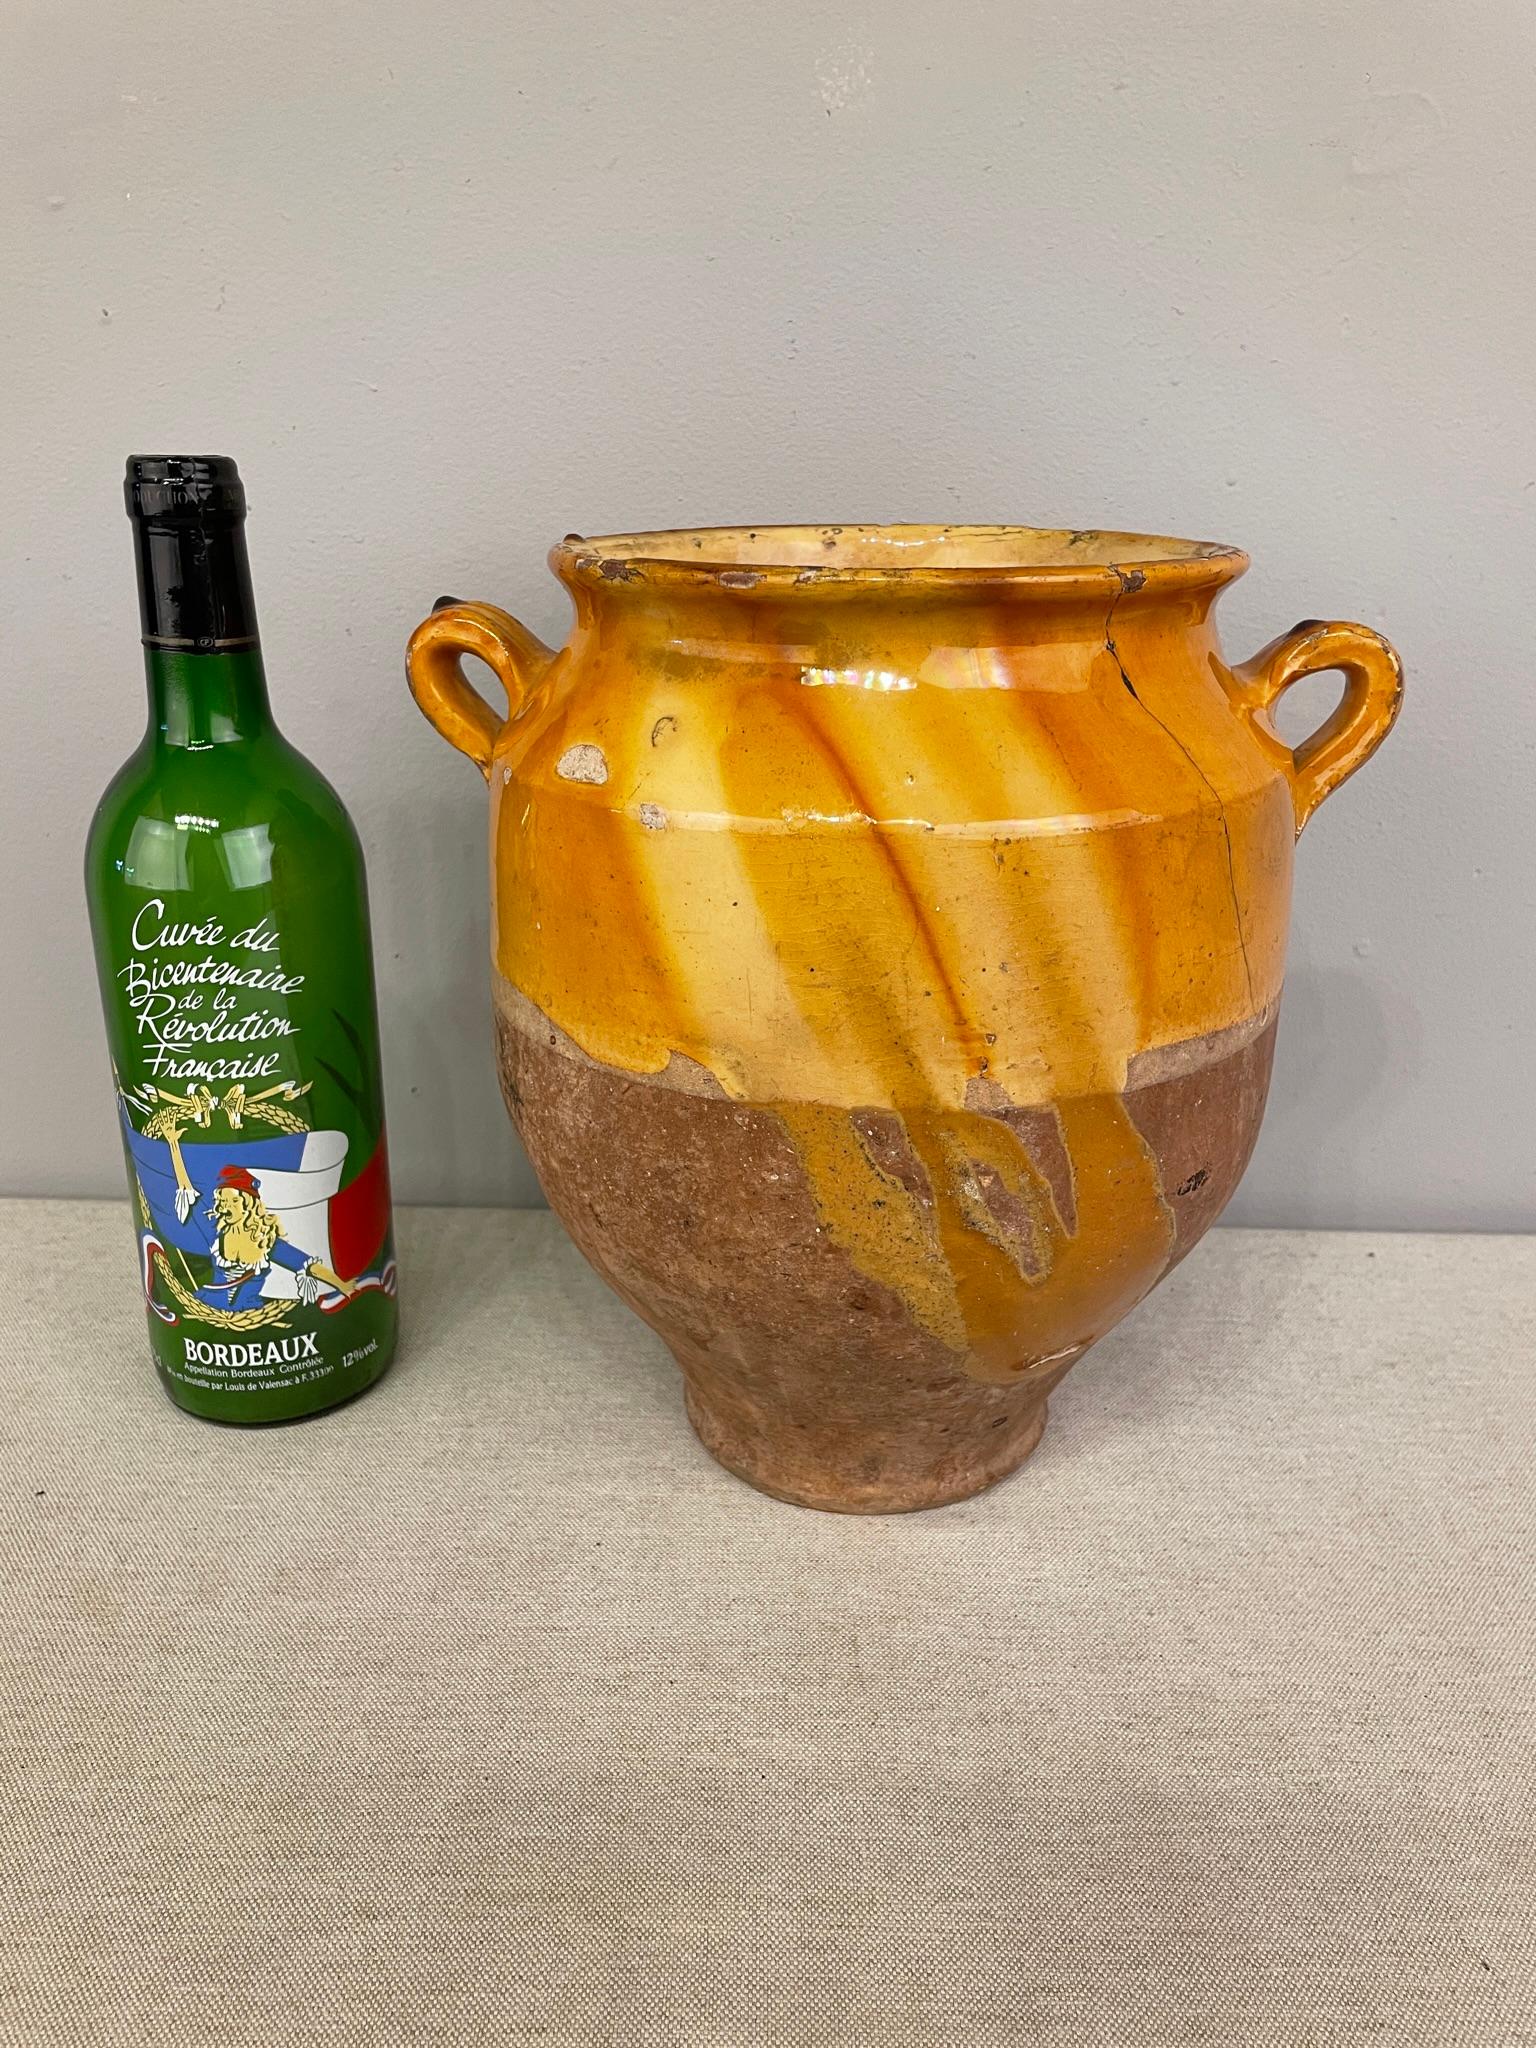 An earthenware confit pot from the Southwest of France with traditional yellow, ochre glaze. Some chips and losses to glaze. These ordinary earthenware vessels were once used daily in the French country home and have beautiful rustic glazes of